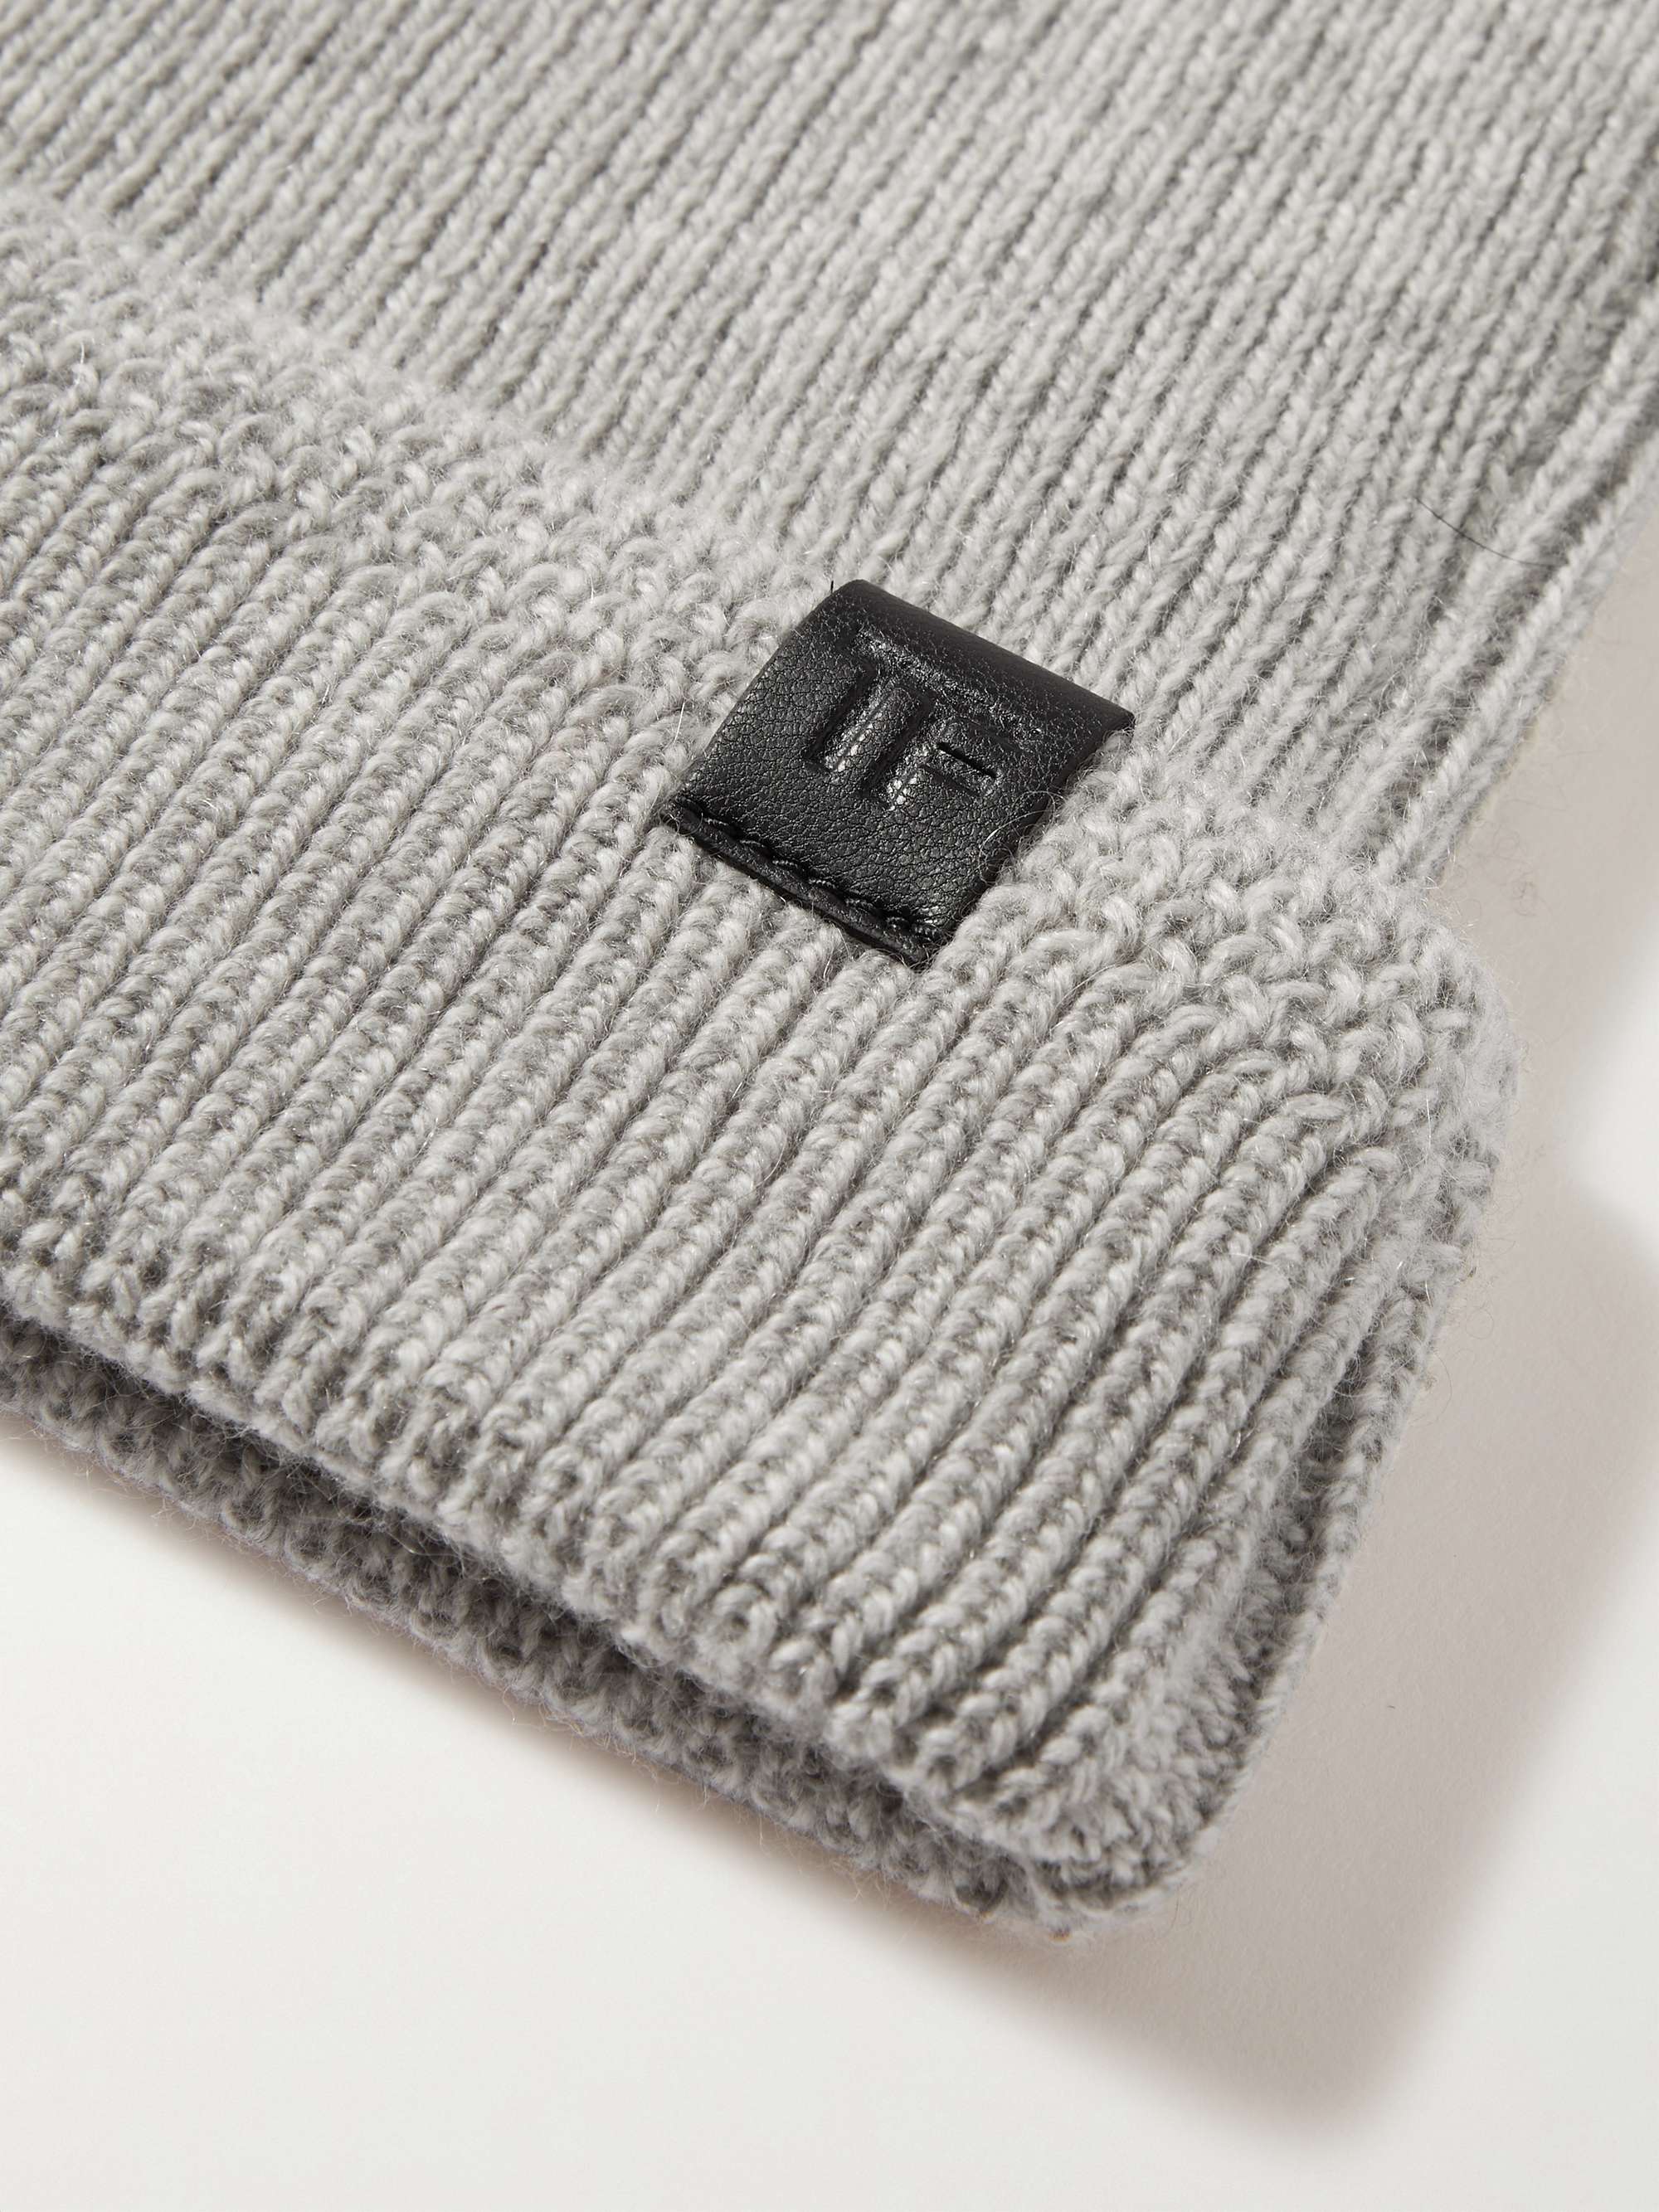 TOM FORD Leather-Trimmed Ribbed Cashmere Beanie for Men | MR PORTER